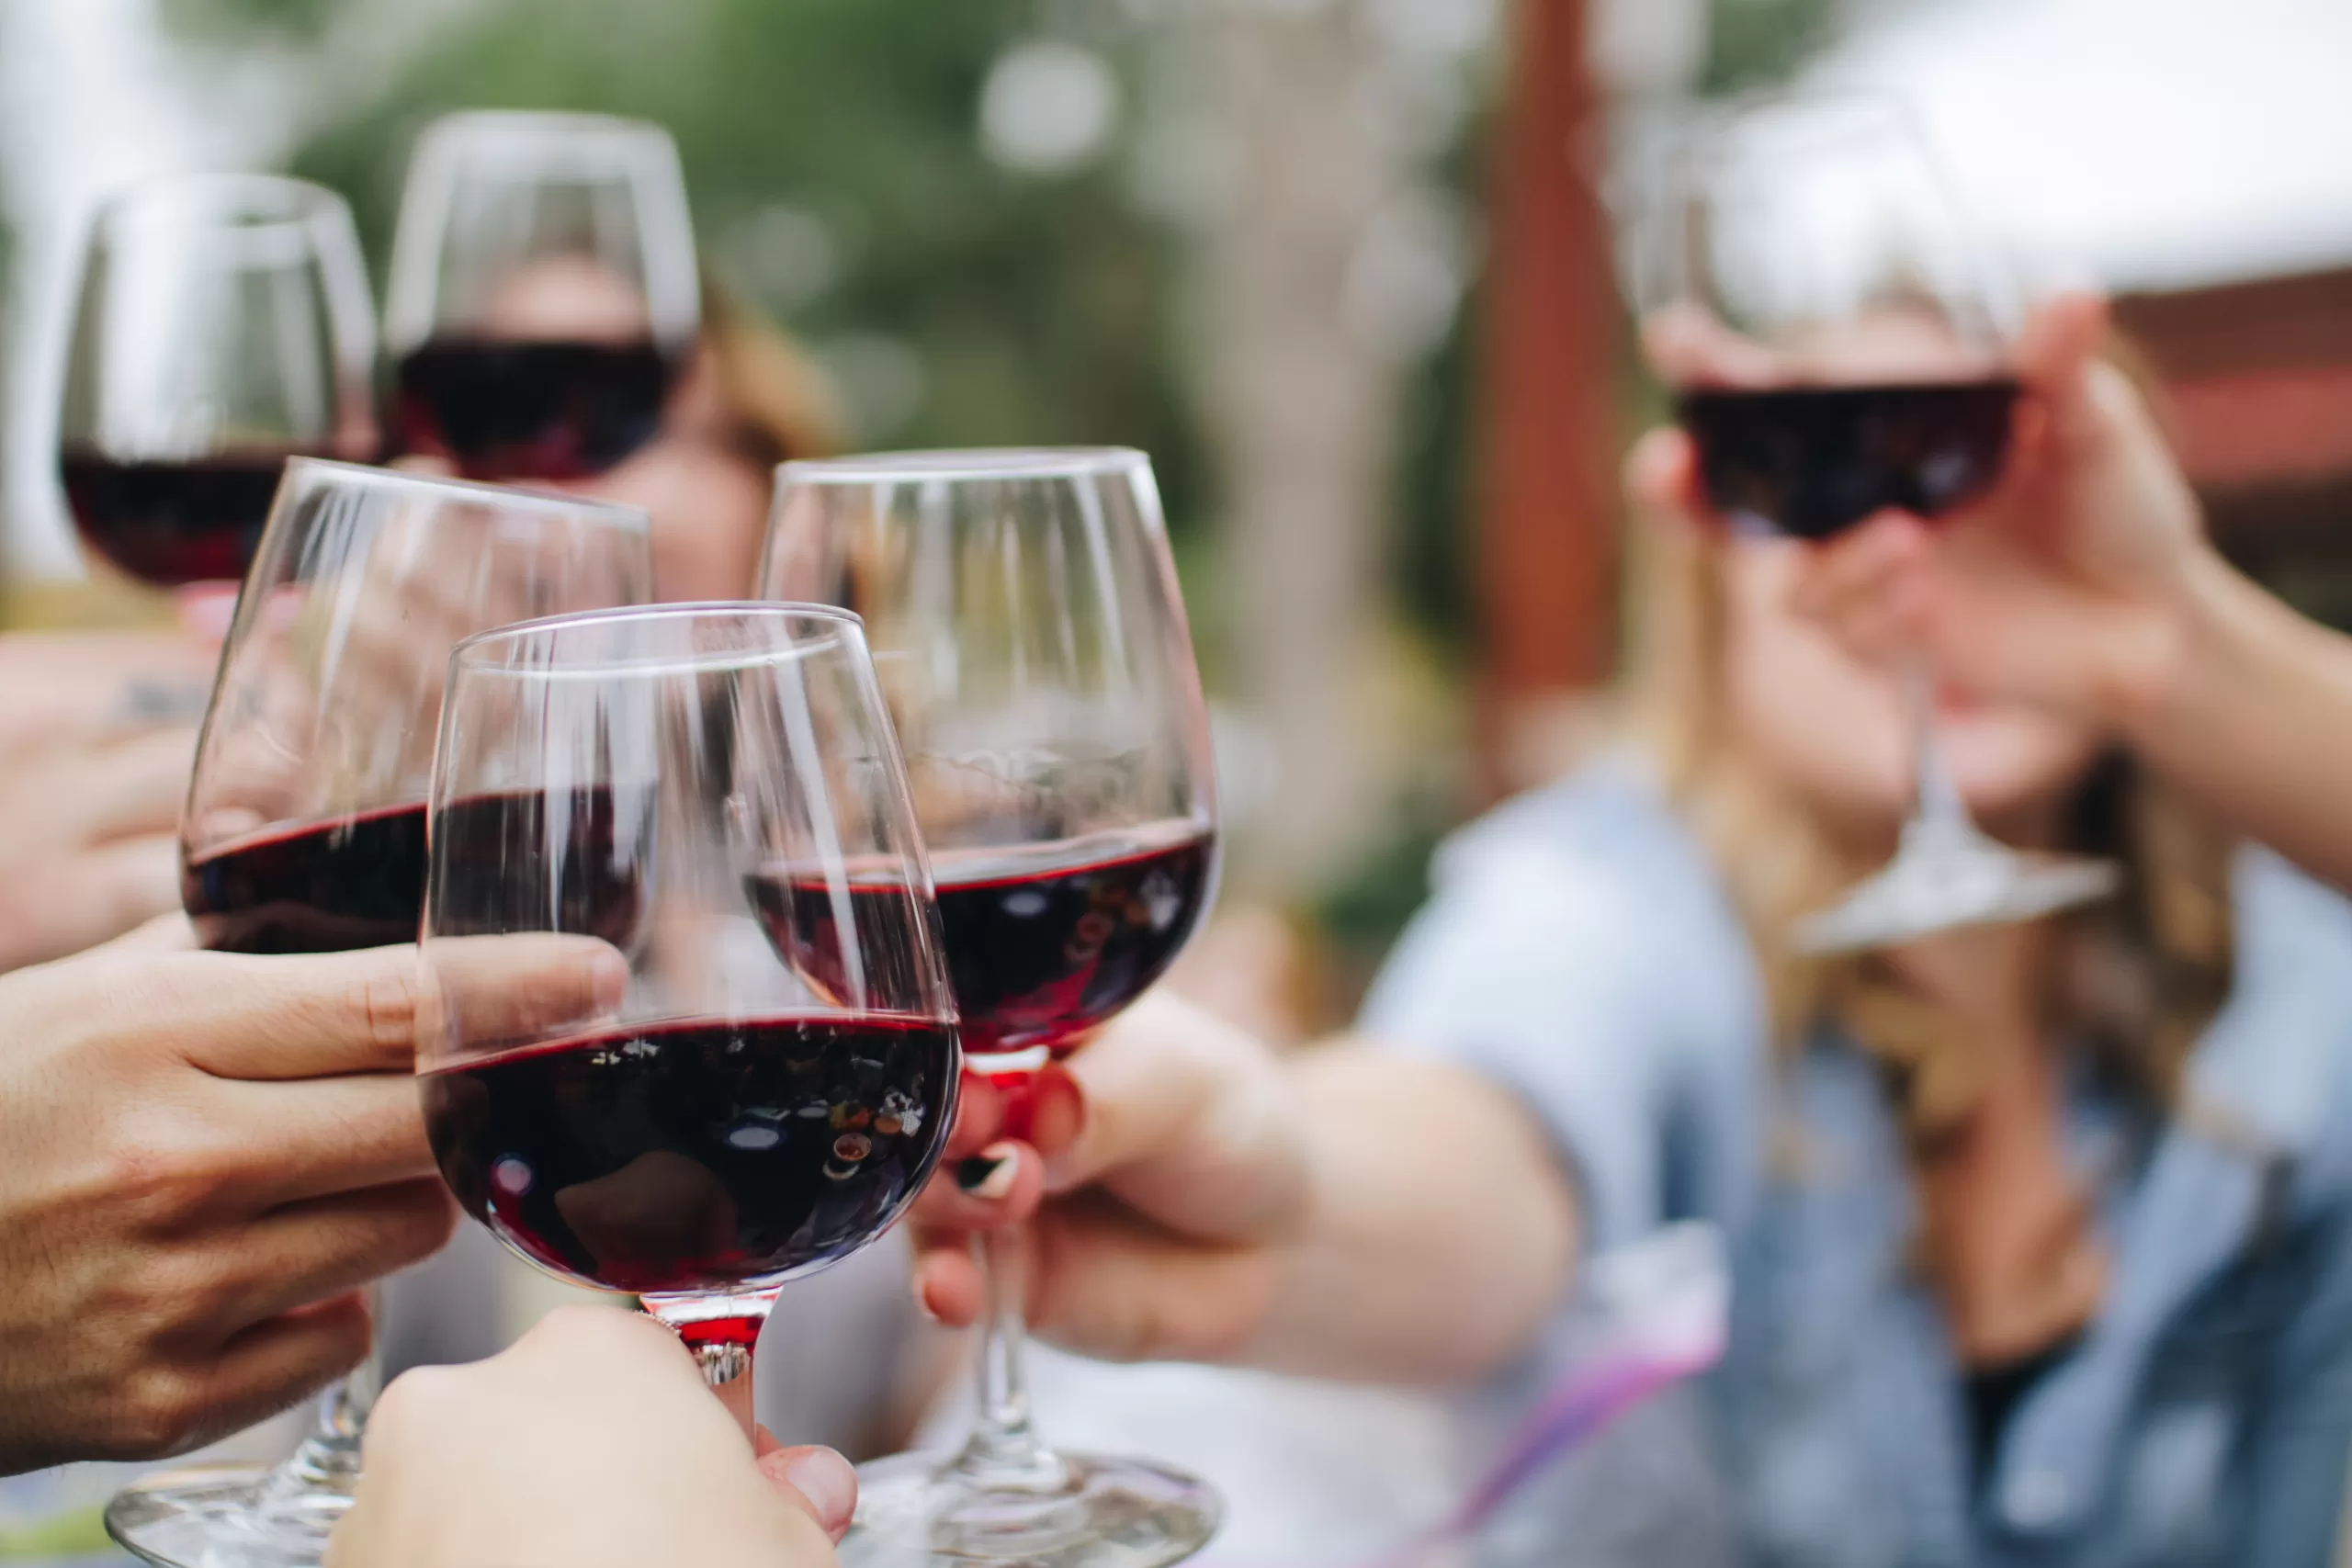 Is it permissible for Christians to consume wine?